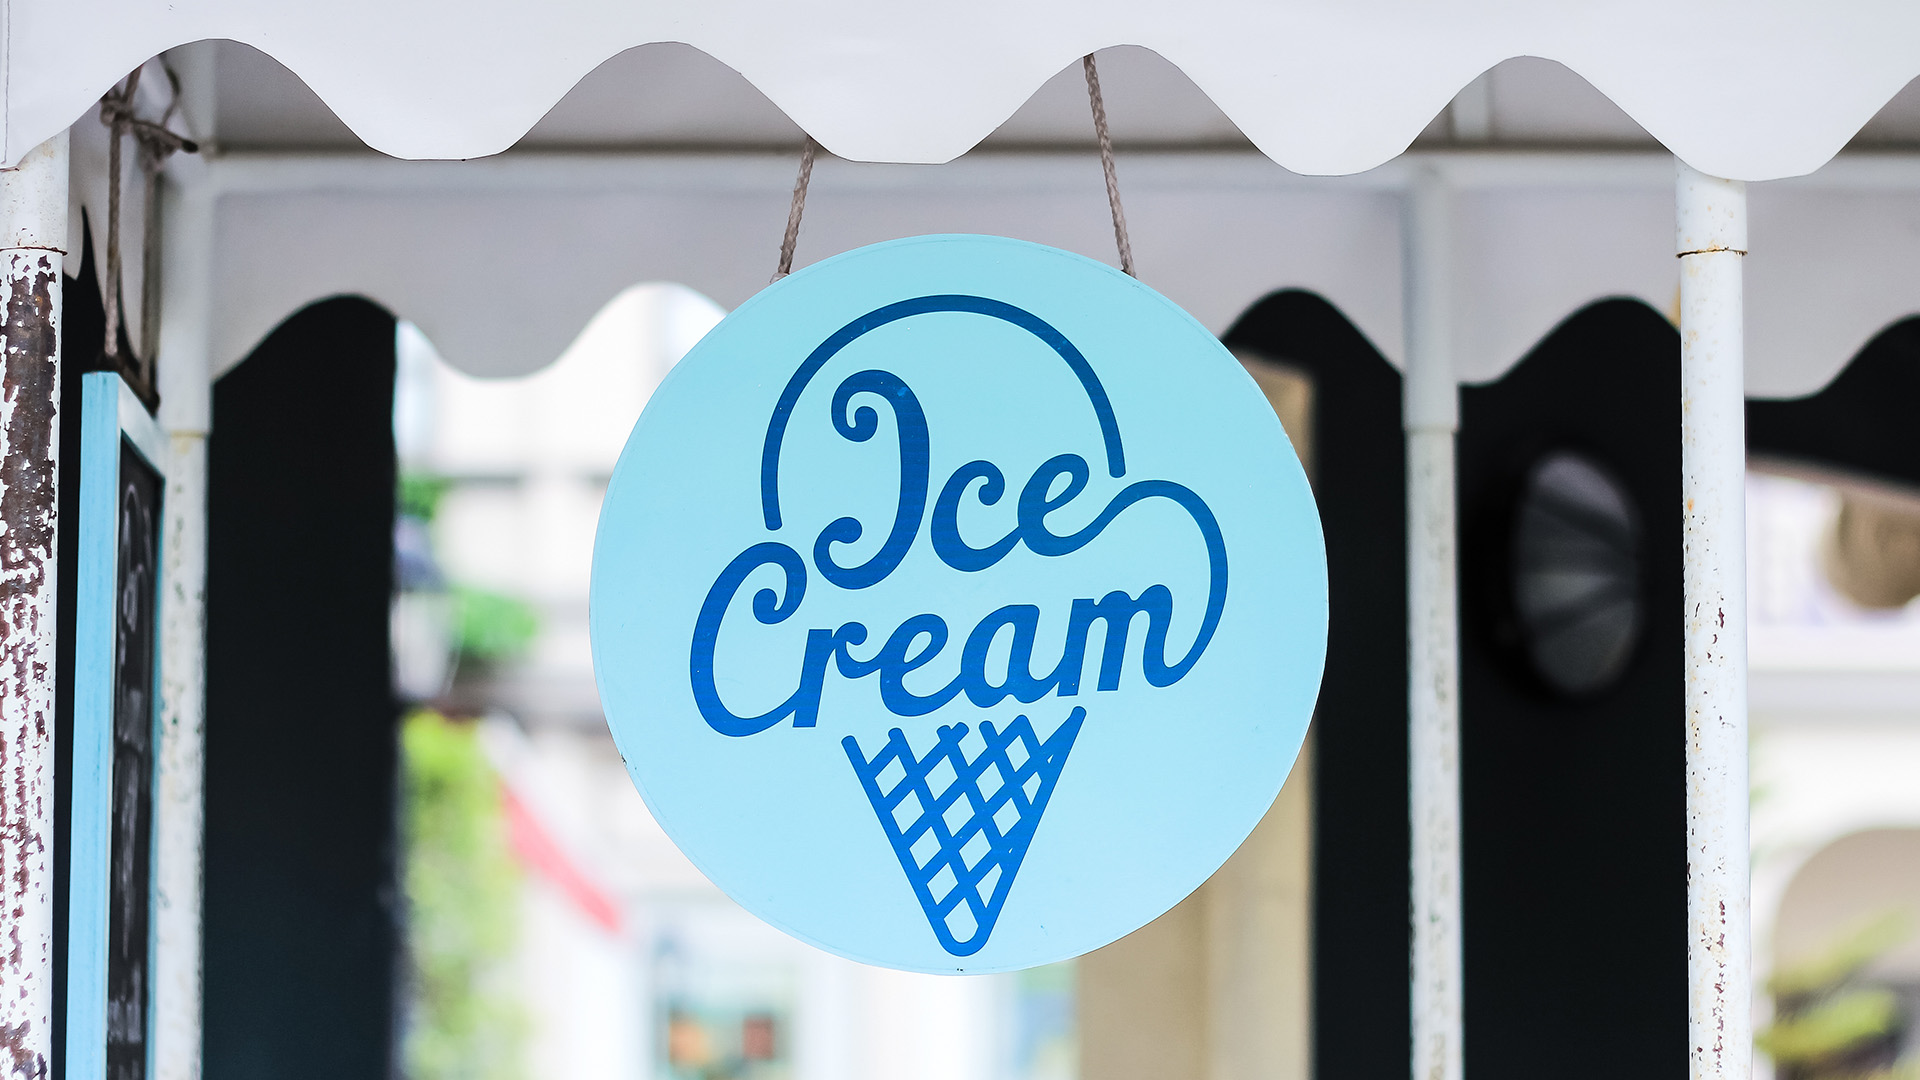 Blue circle Ice Cream sign hanging from a building